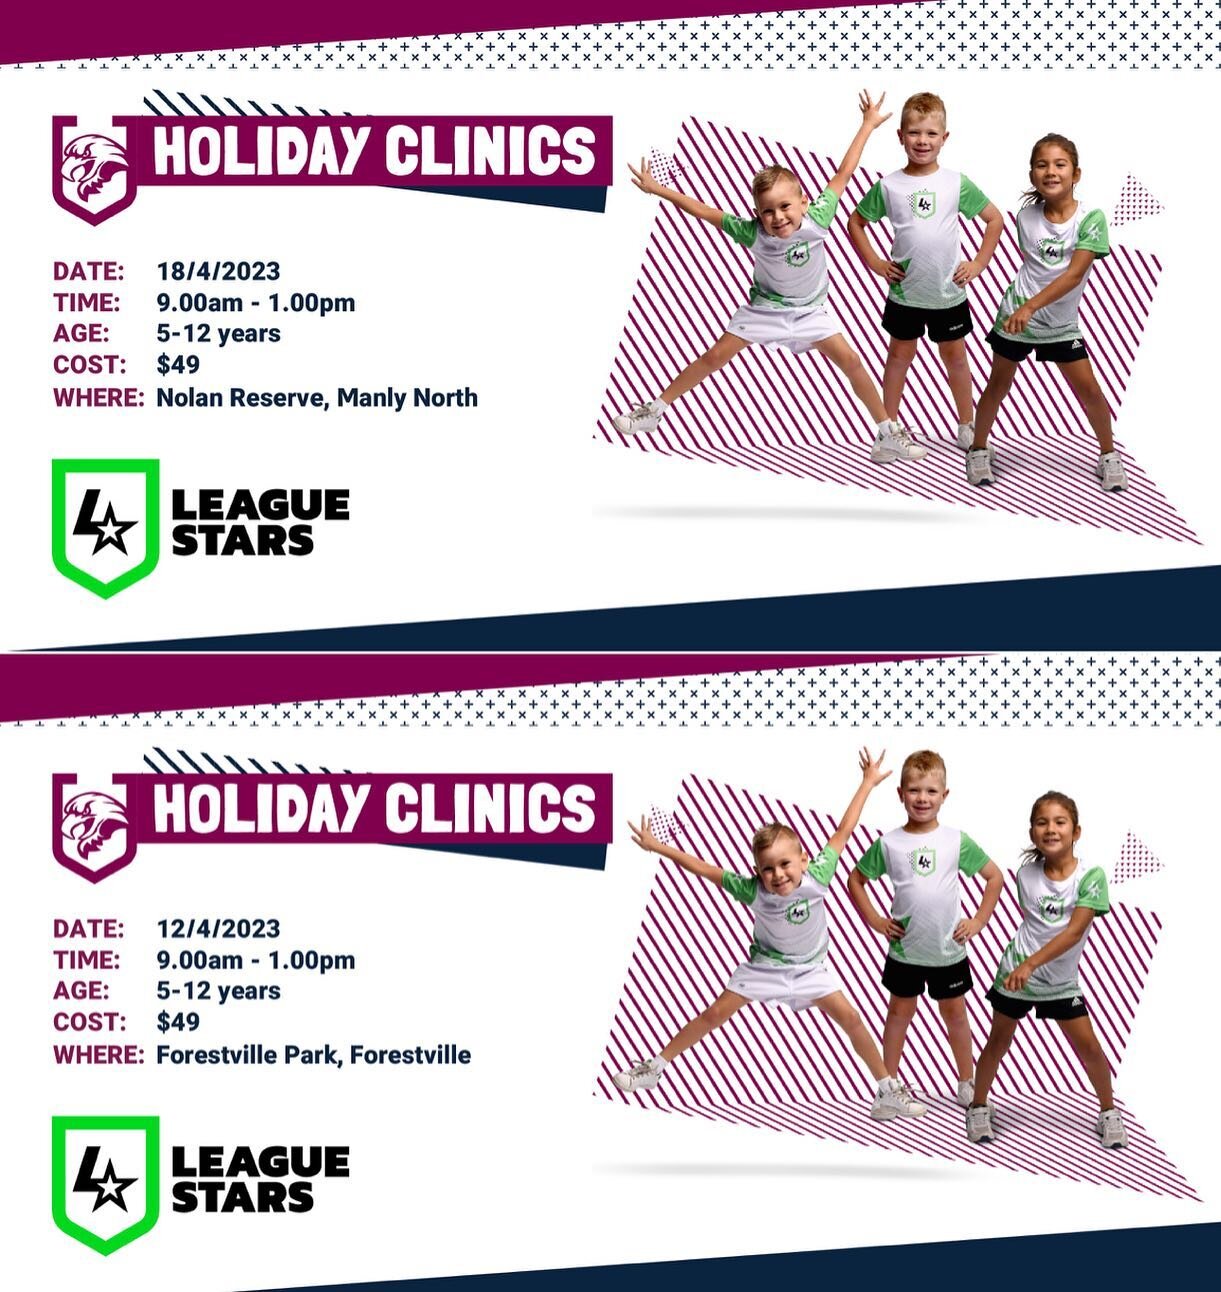 Need a school holiday activity? Look no further. 

The NRL have two upcoming Holiday Clinics at Forestville Park, Forestville on Tuesday 12th April and Nolan Reserve, North Manly on Wednesday 18th of April.

The clinics are open to all kids from 5 - 